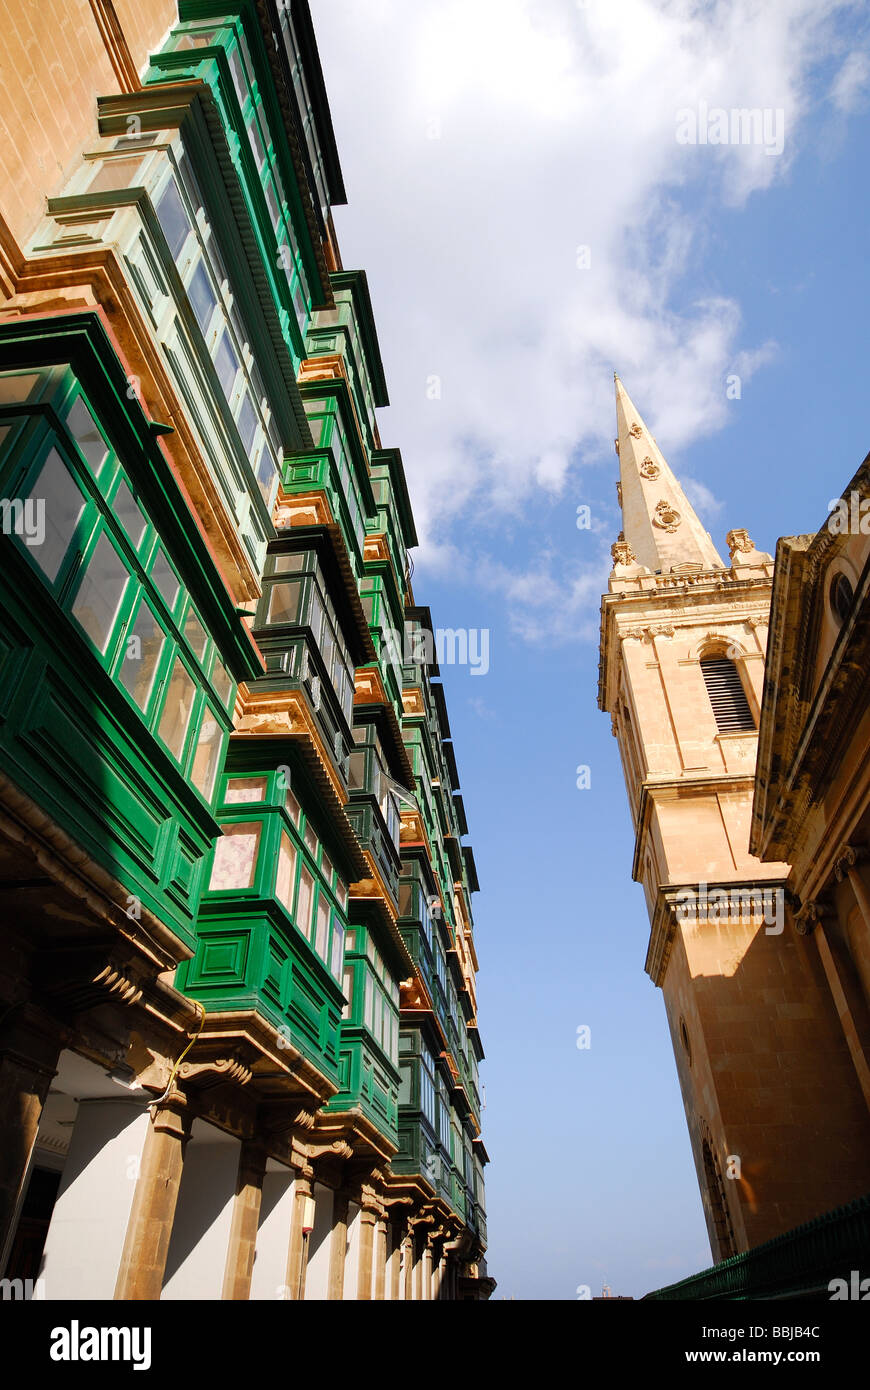 MALTA. Buildings on Triq il-Punent in Valletta, with St. Paul's Anglican Cathedral on the right. 2009. Stock Photo